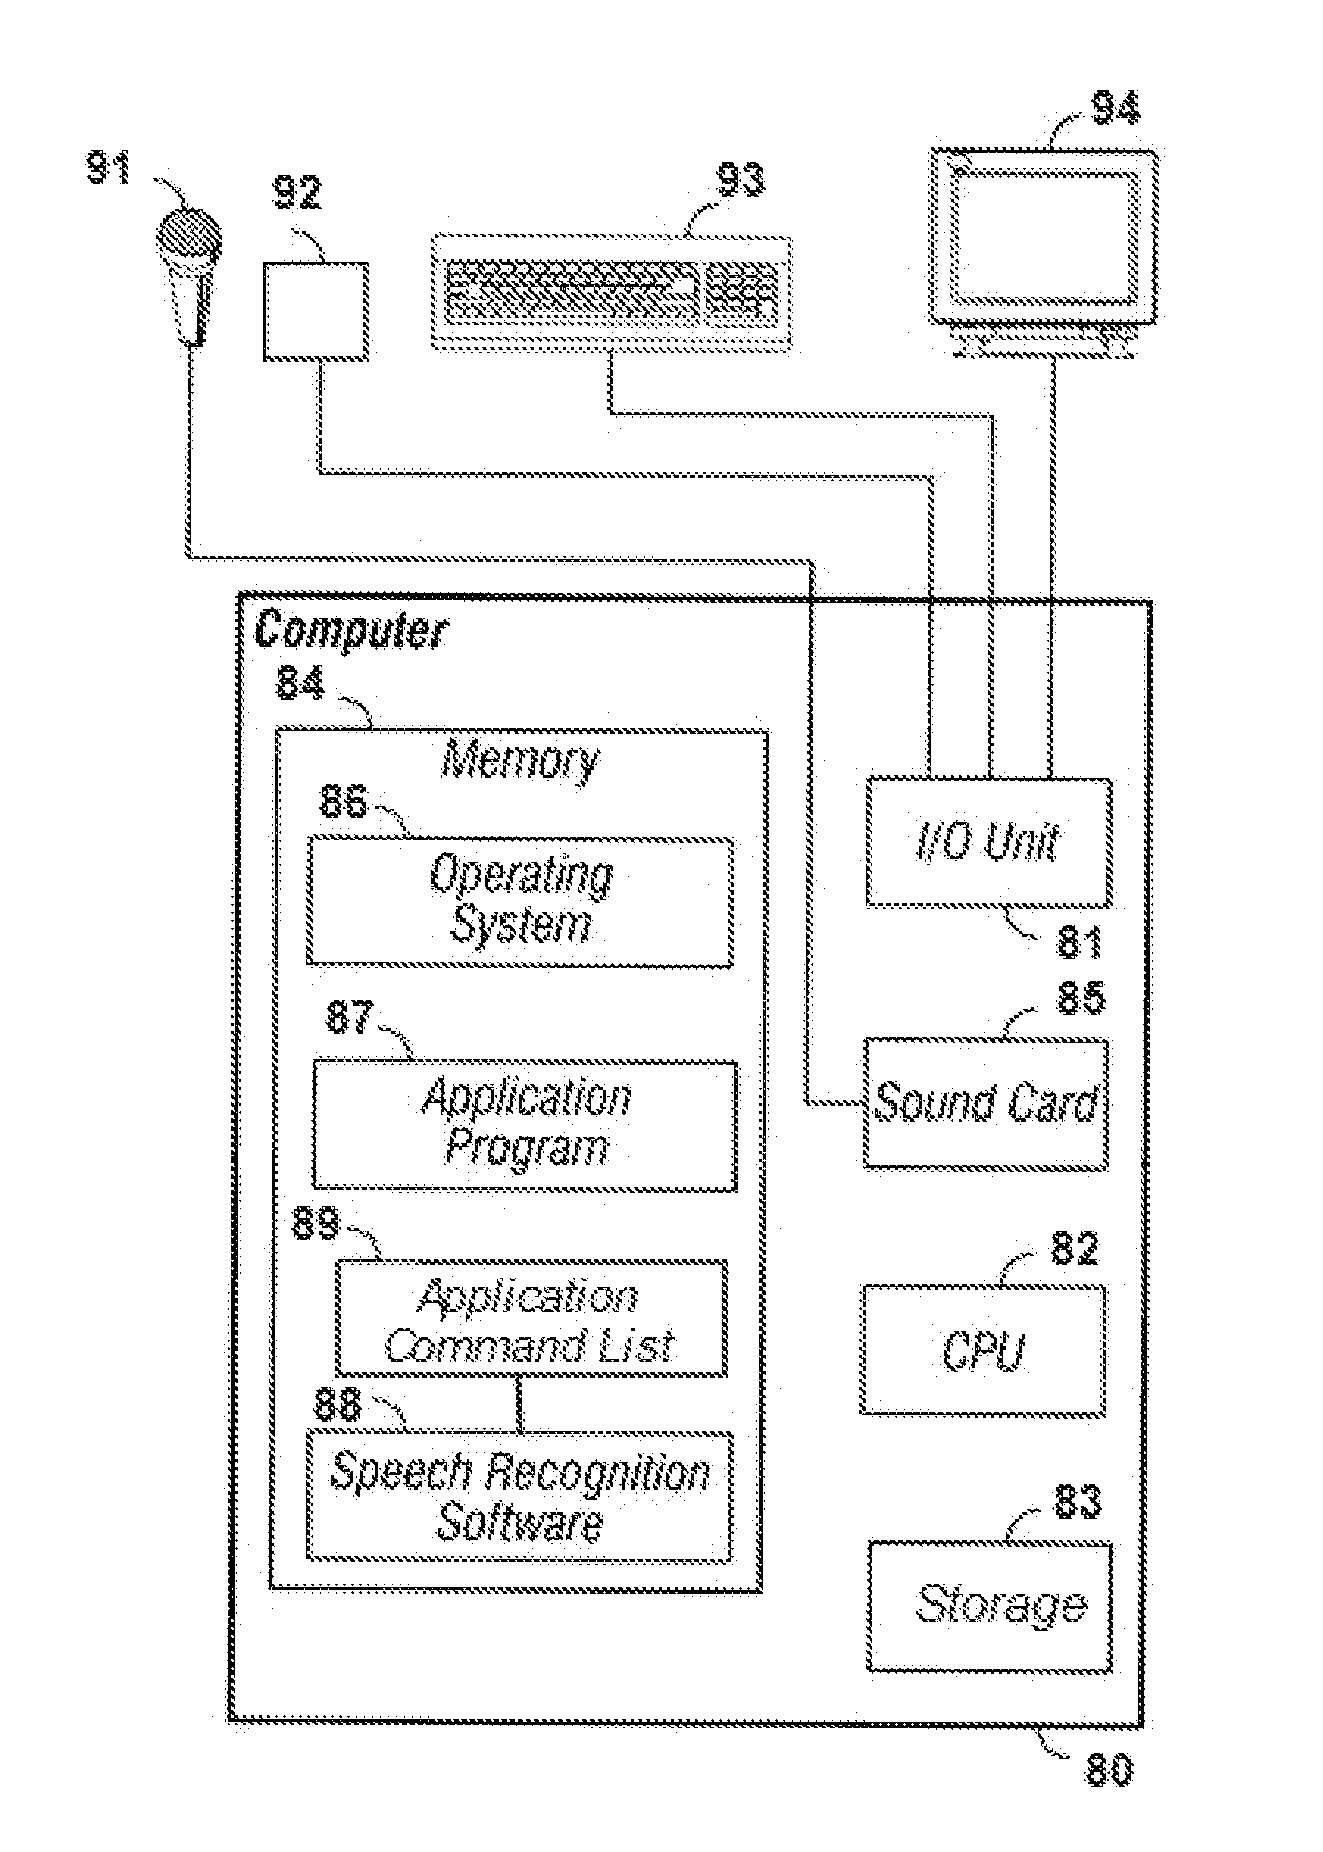 Mouse-free system and method to let users access, navigate, and control a computer device